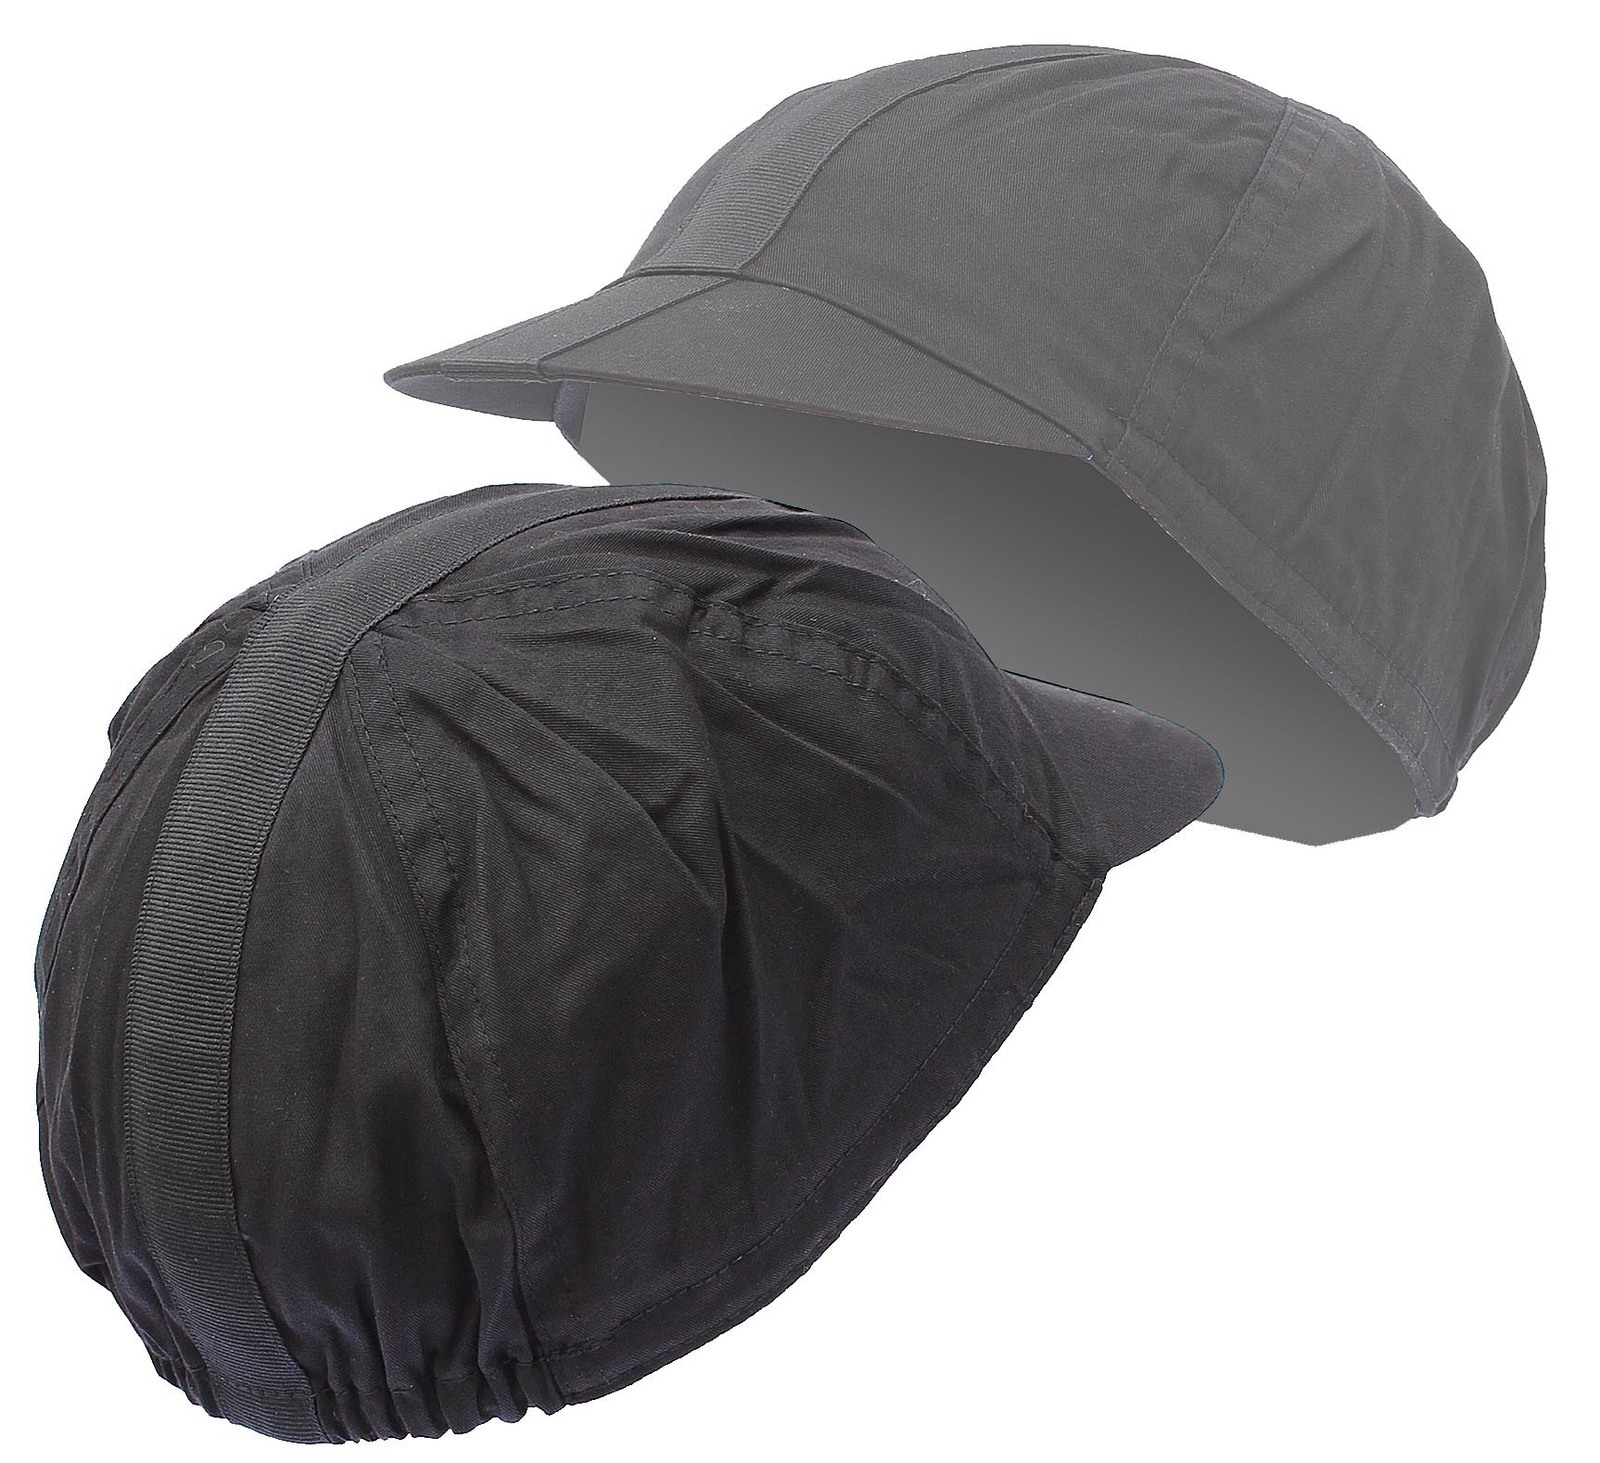 Cyclingdeal Cycling Outdoor Hat Cap Black